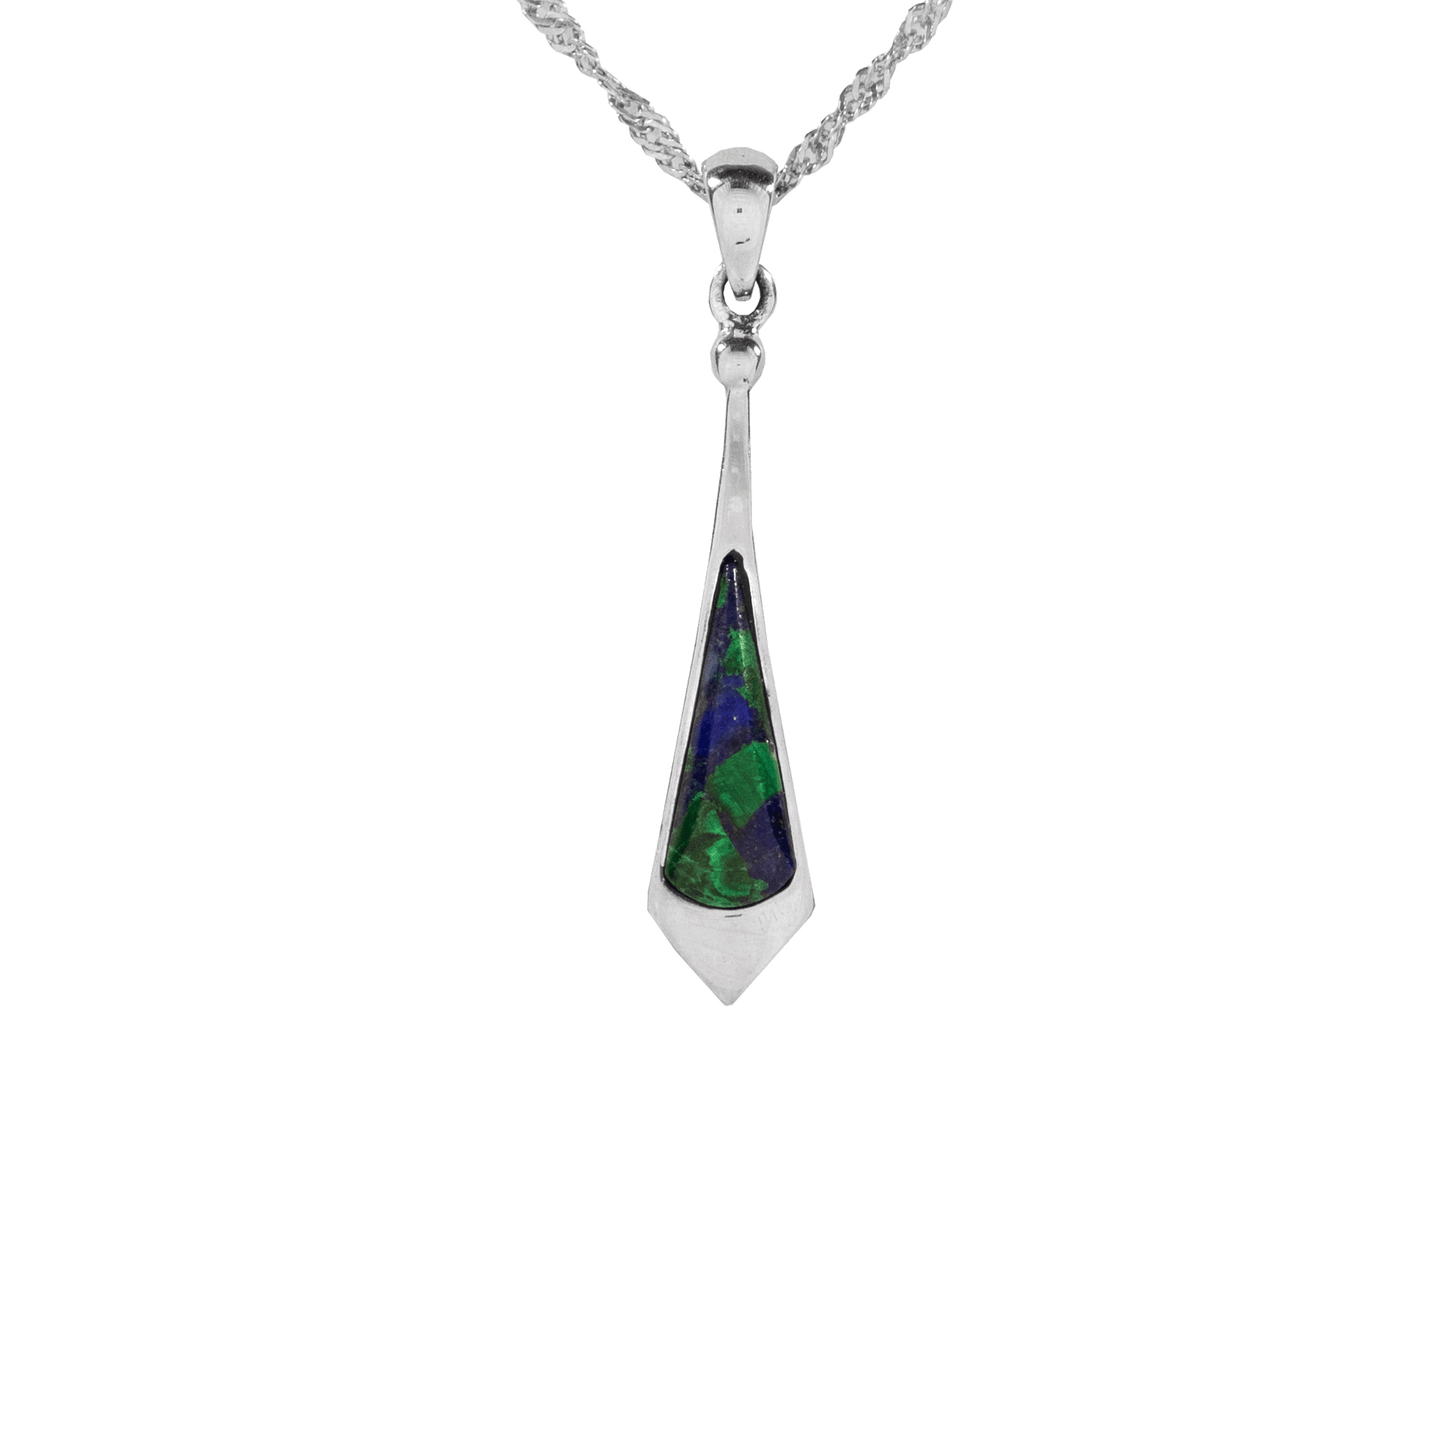 Elegant Eilat Stone in a bow-tie-shaped sterling silver drop pendant on a sterling silver chain